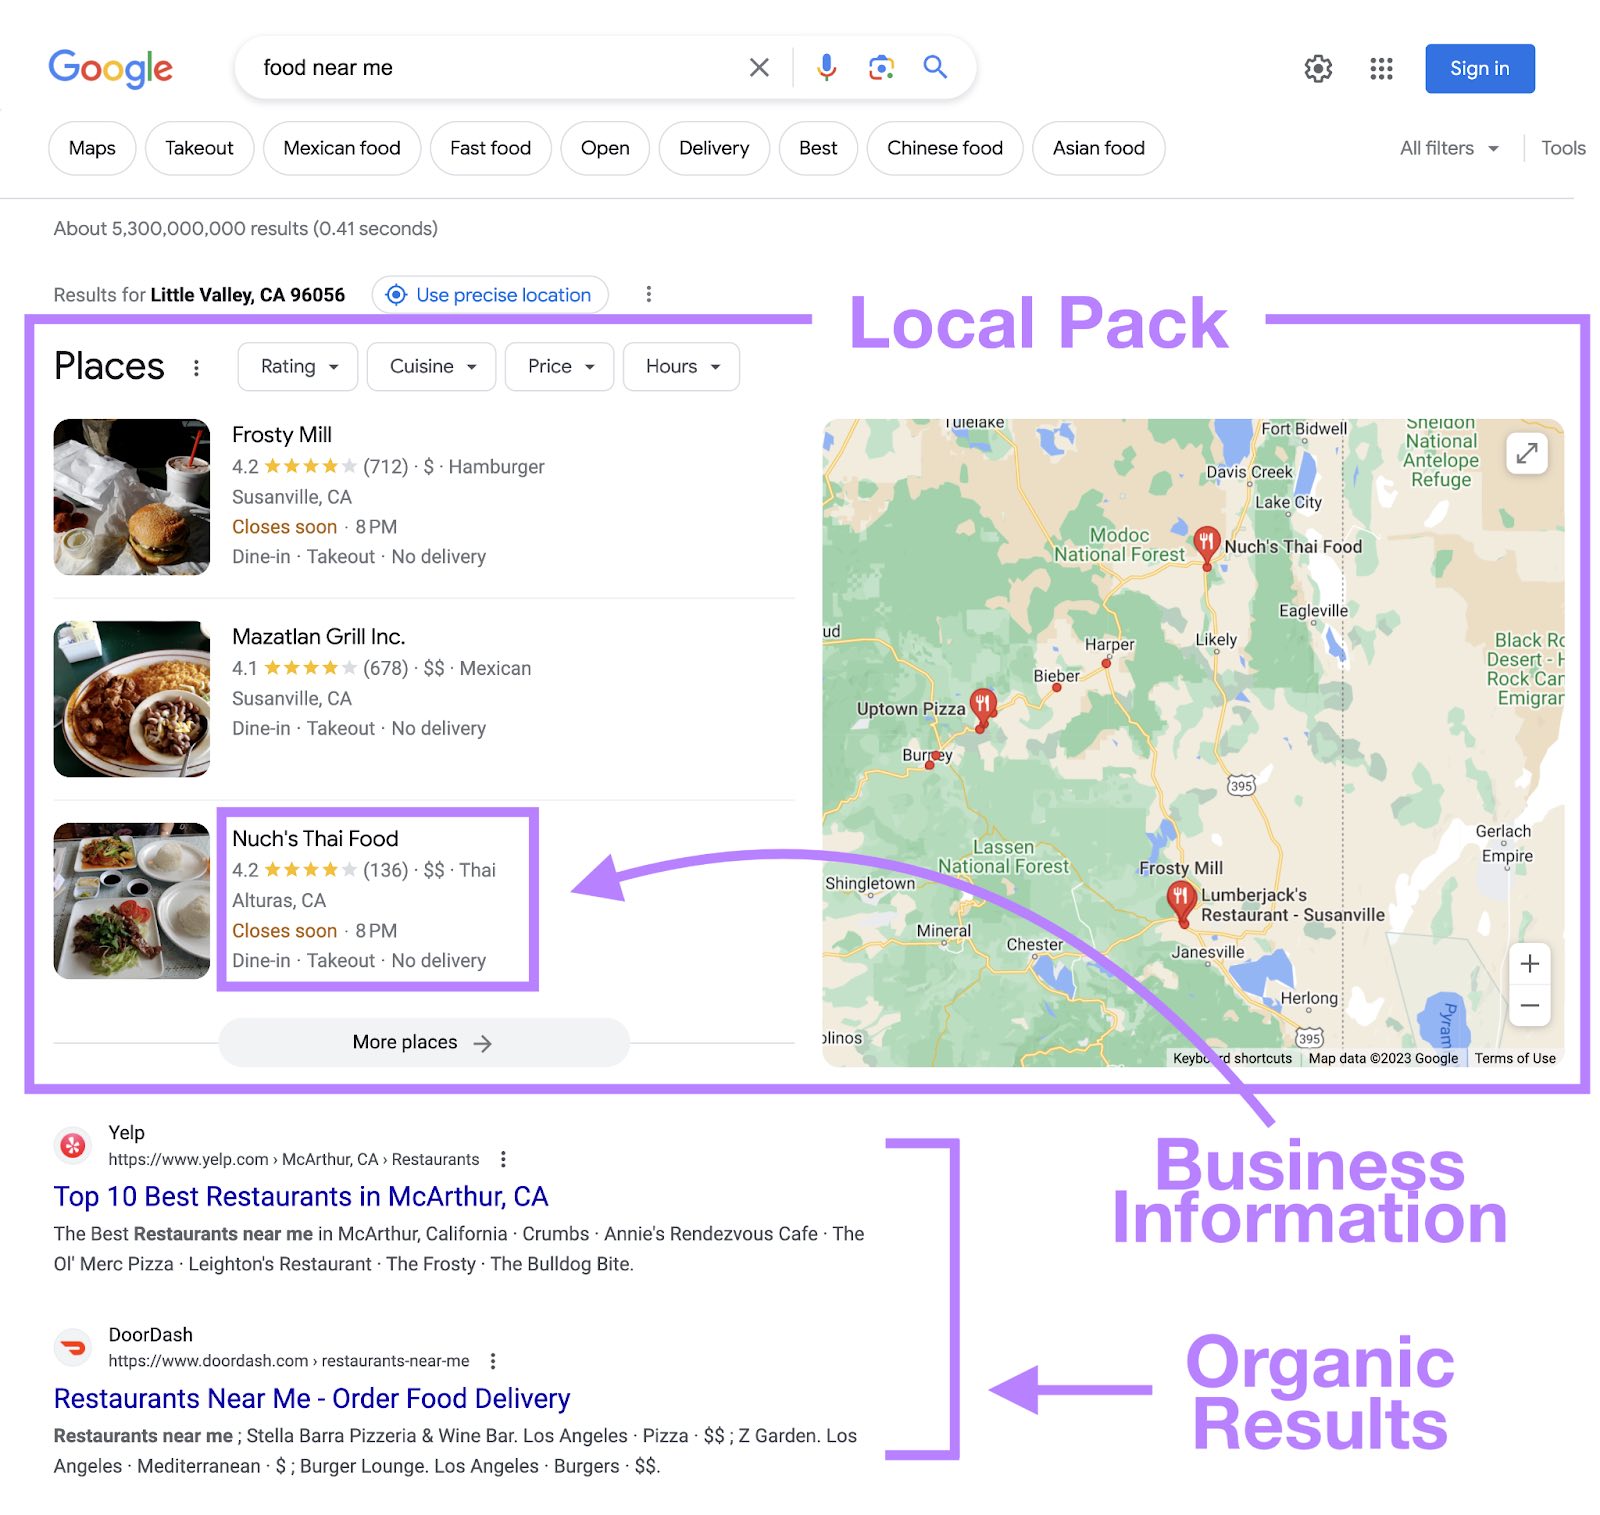 Google's SERP showing local pack and organic results (below) for "food near me" query